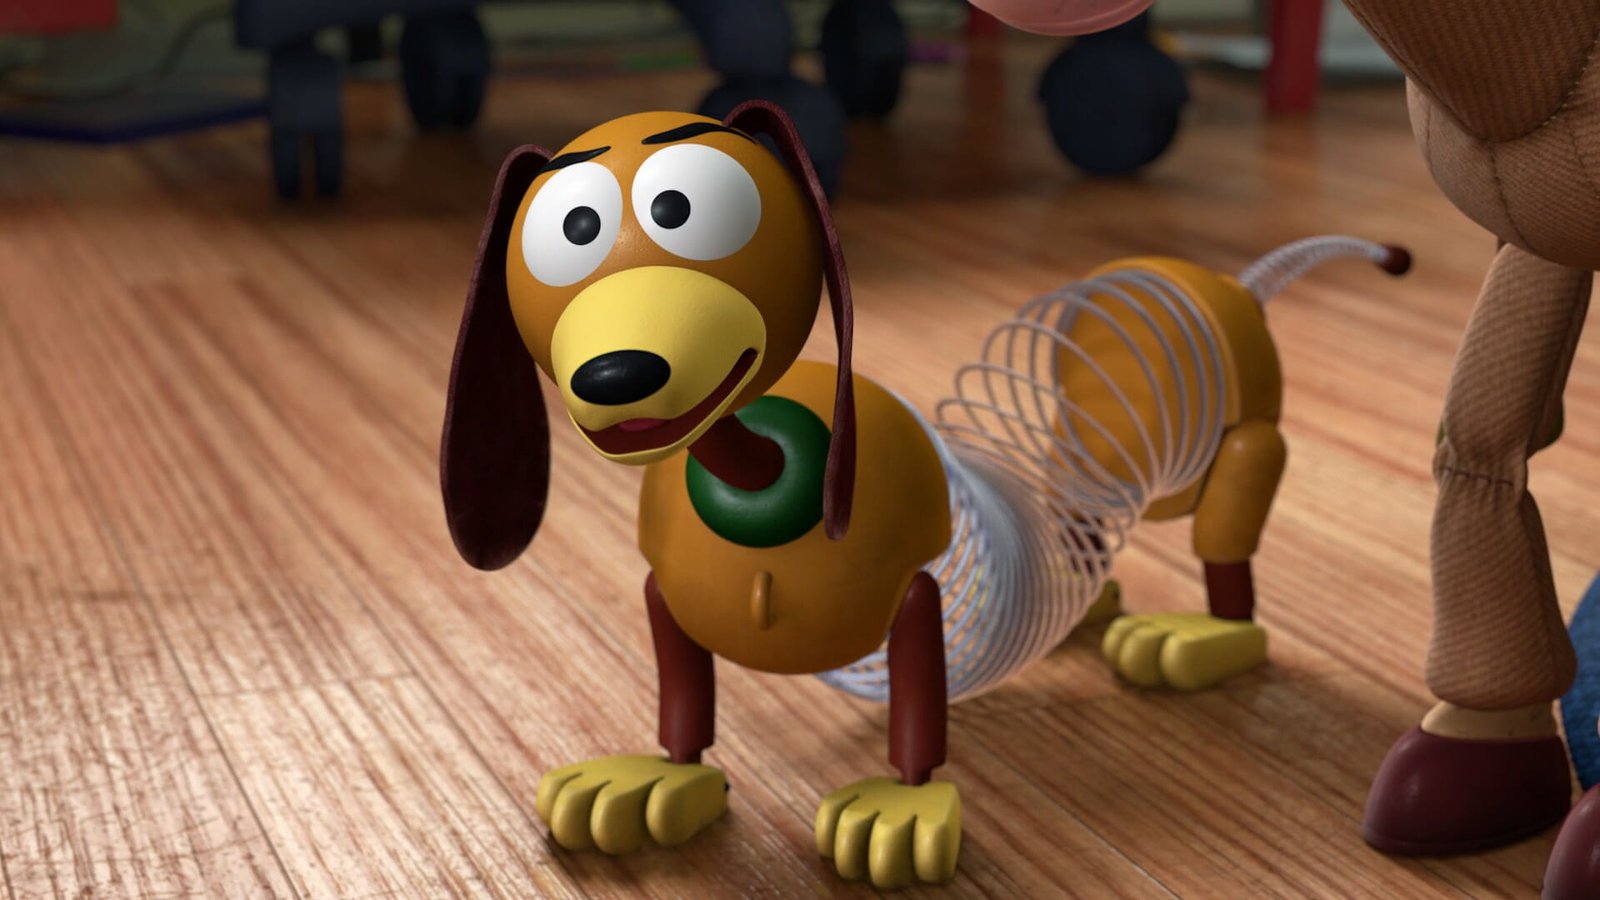 Best toy story characters: Slinky dog